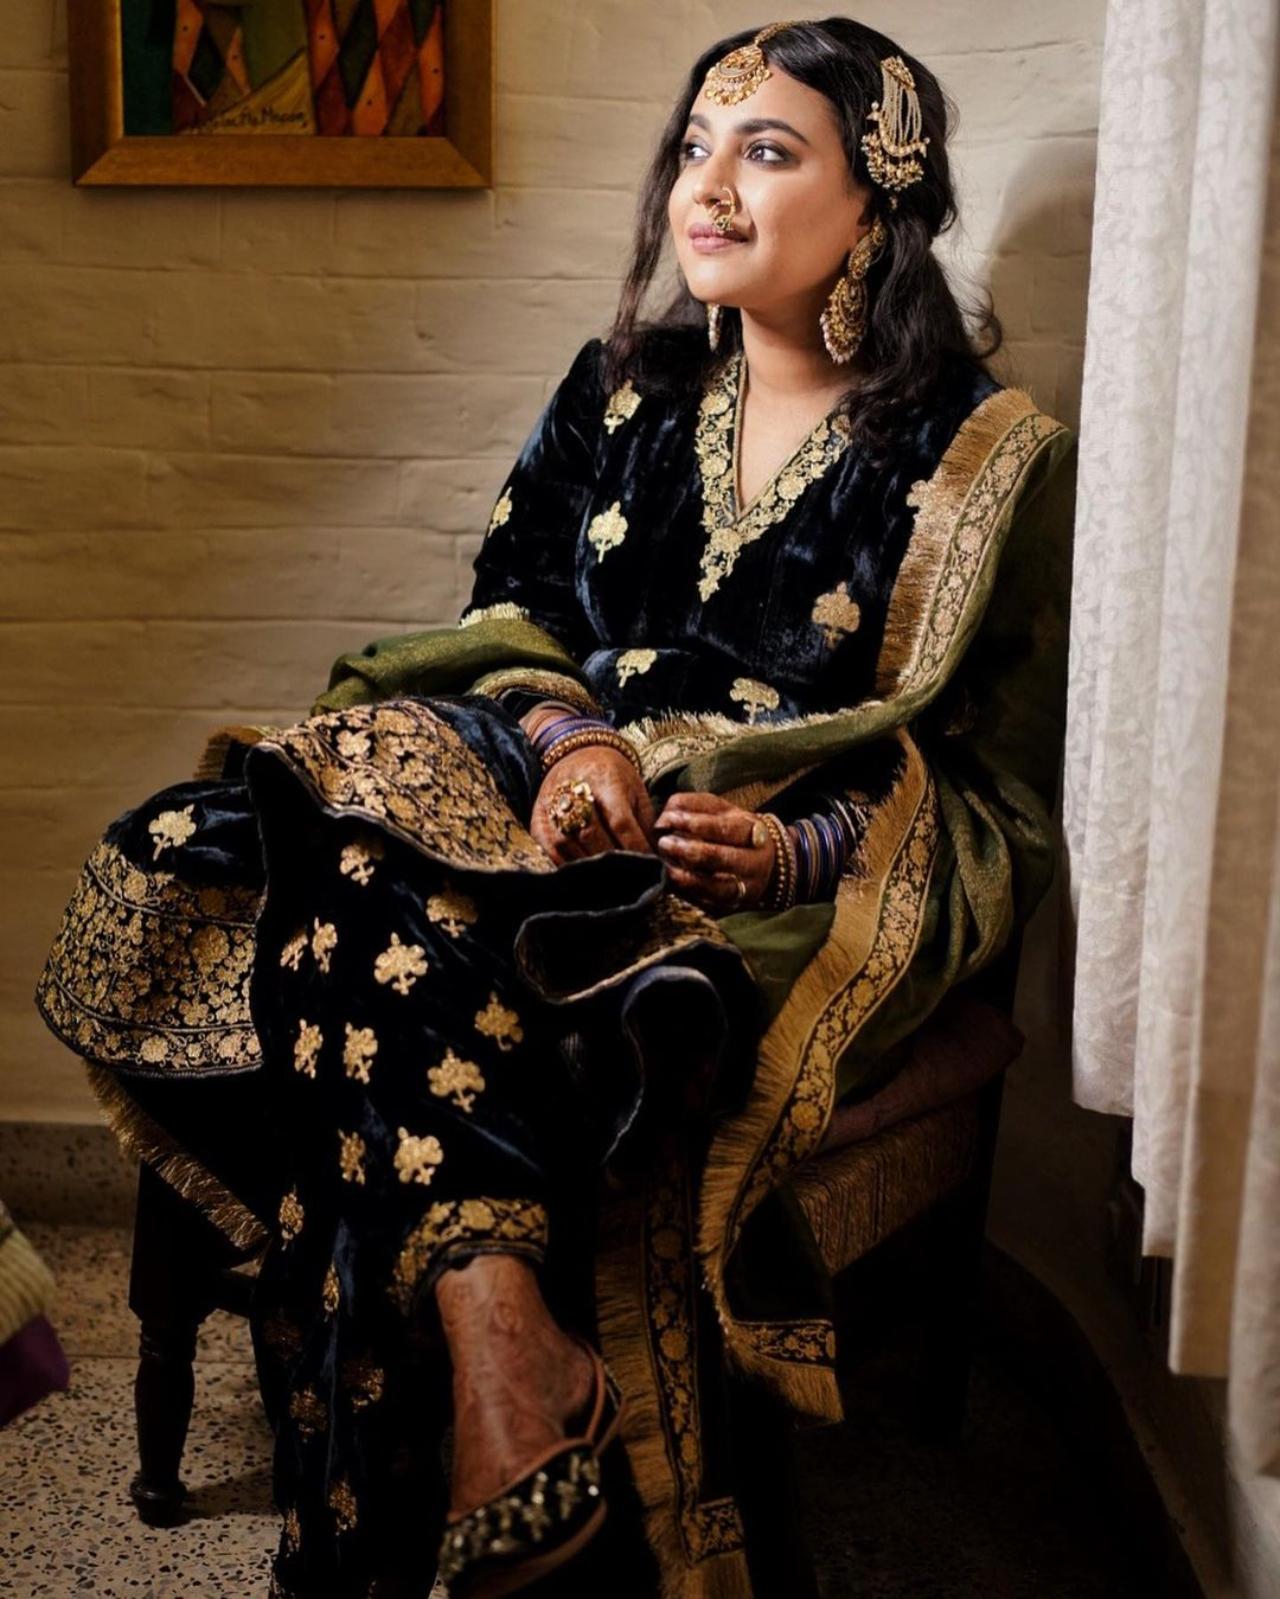 Actress Swara Bhasker looked stunning in an ethnic joda by the label Heena Kochhar. Swara paired her ensemble with some gold jewellery to compliment the gold work in her outfit.